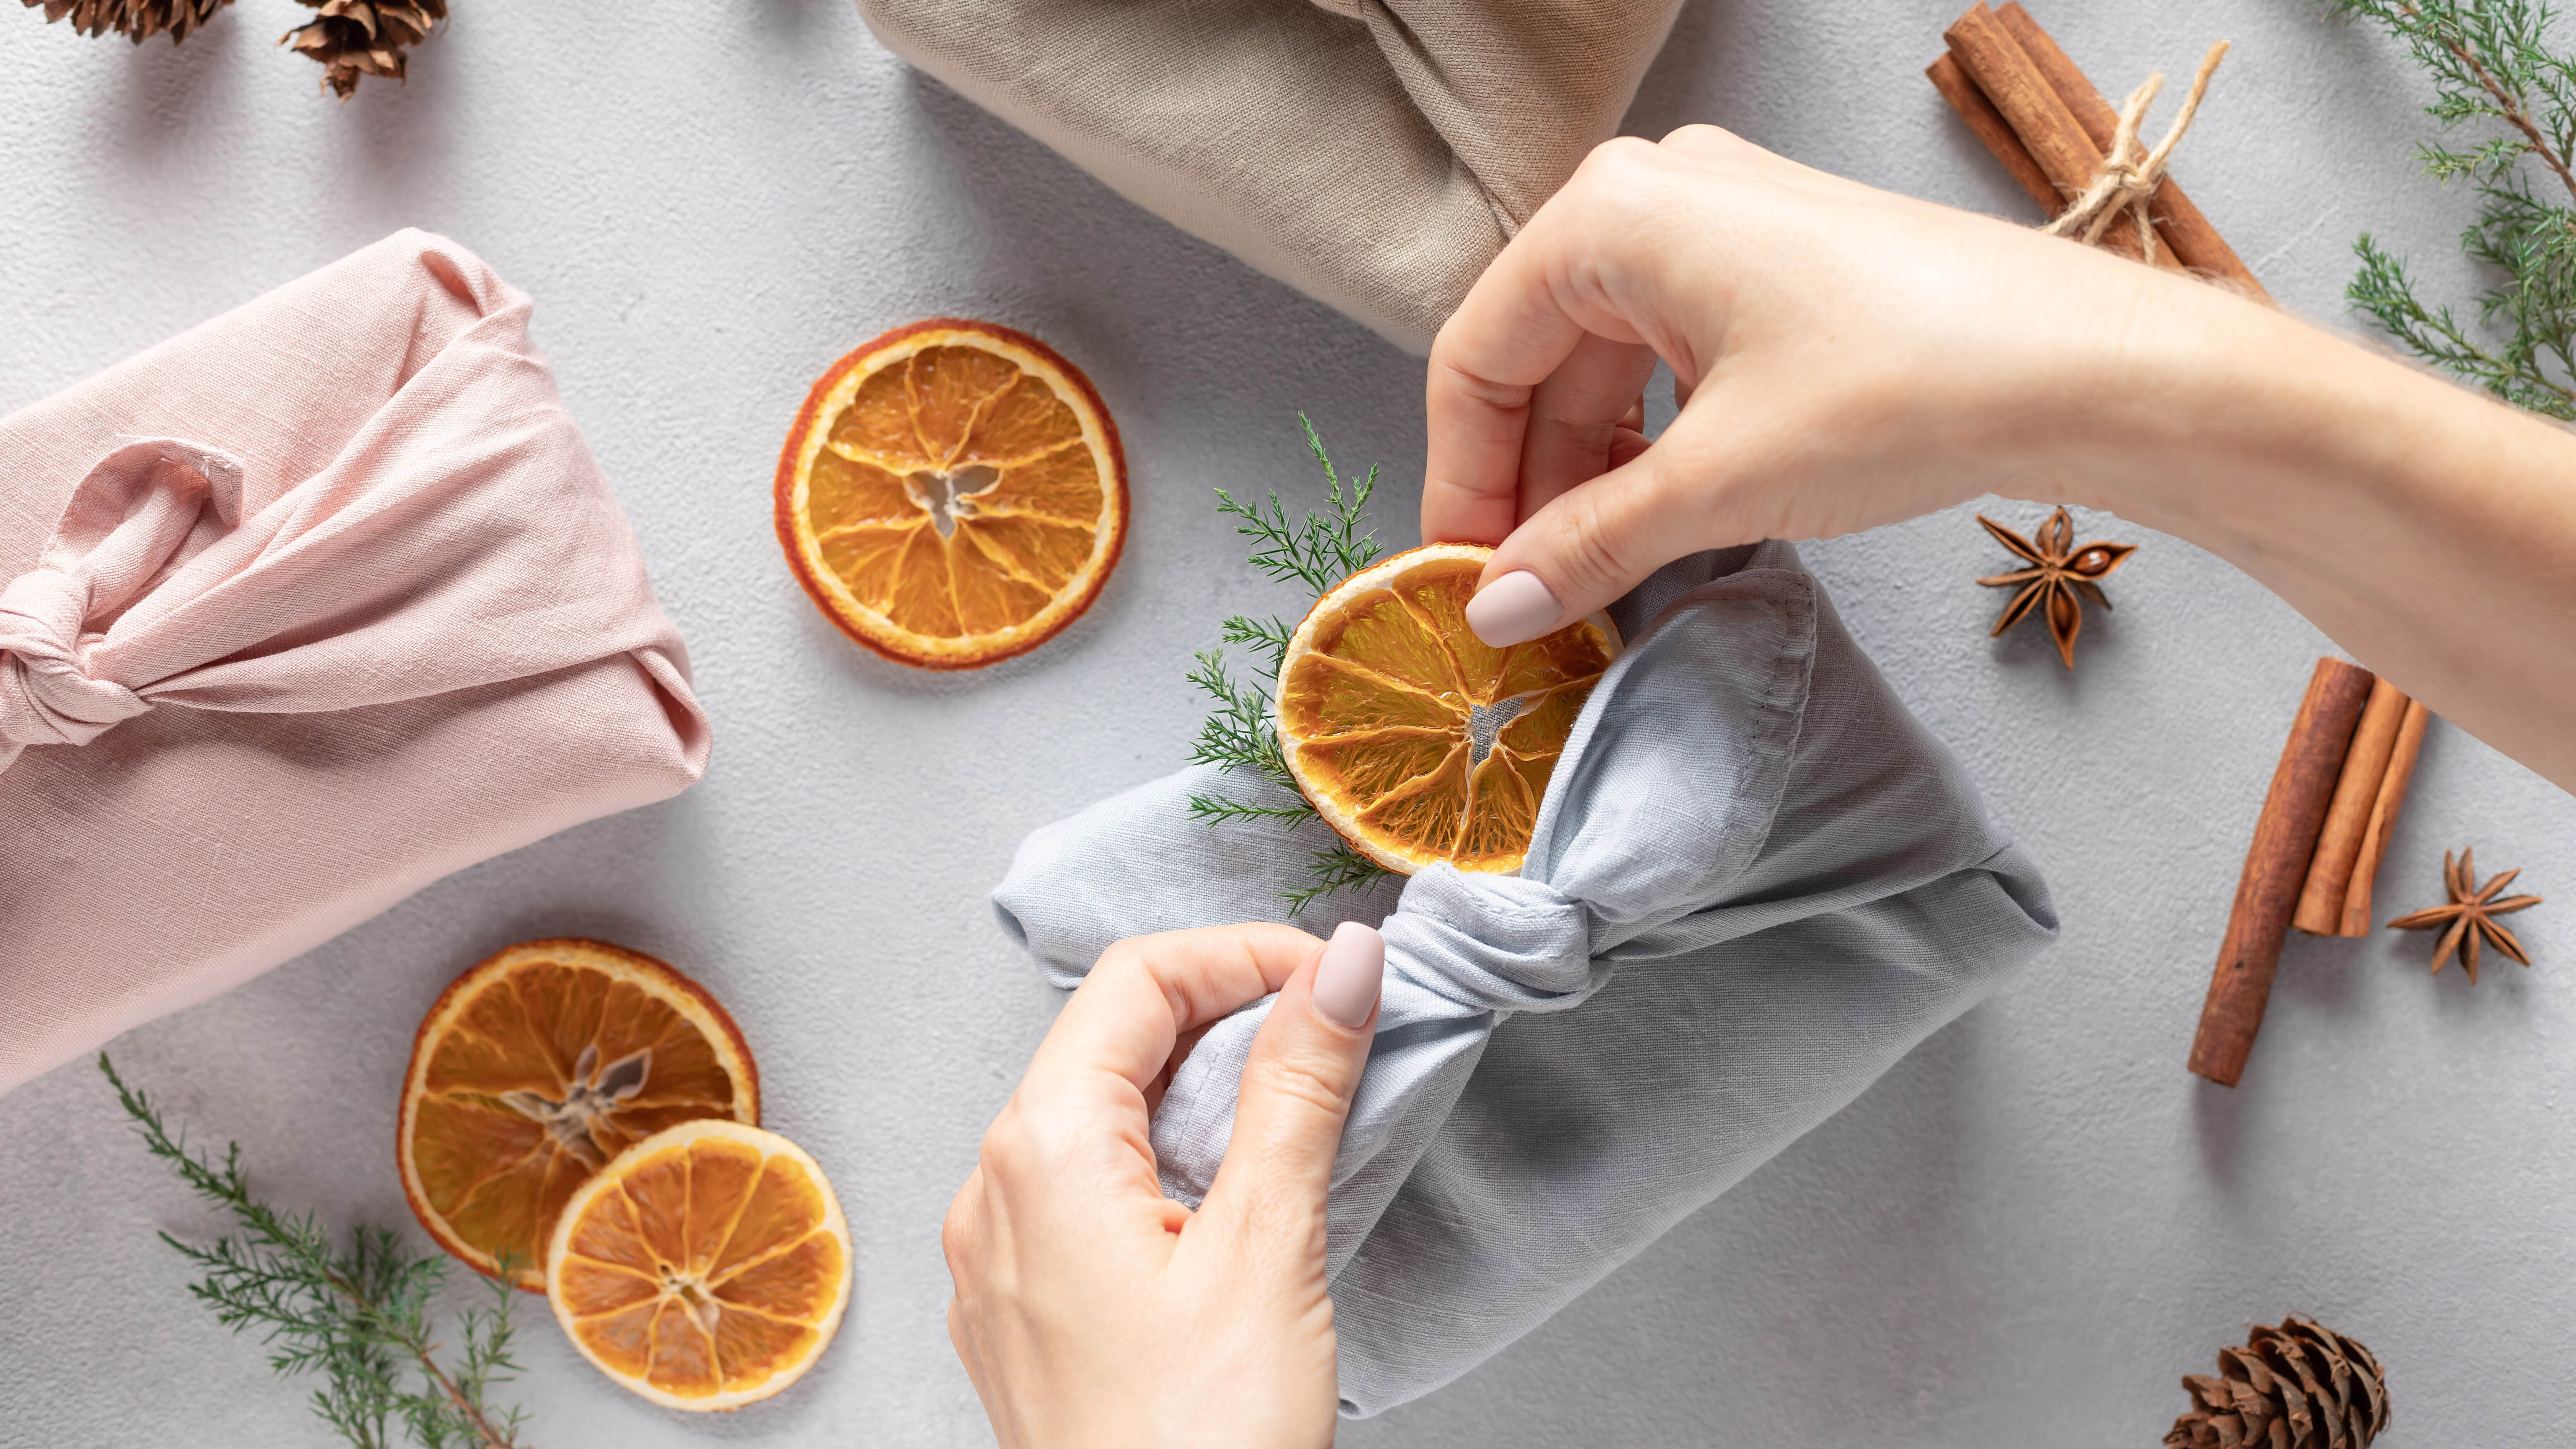 Woman adding a dried orange slice to a gift wrapped in fabric